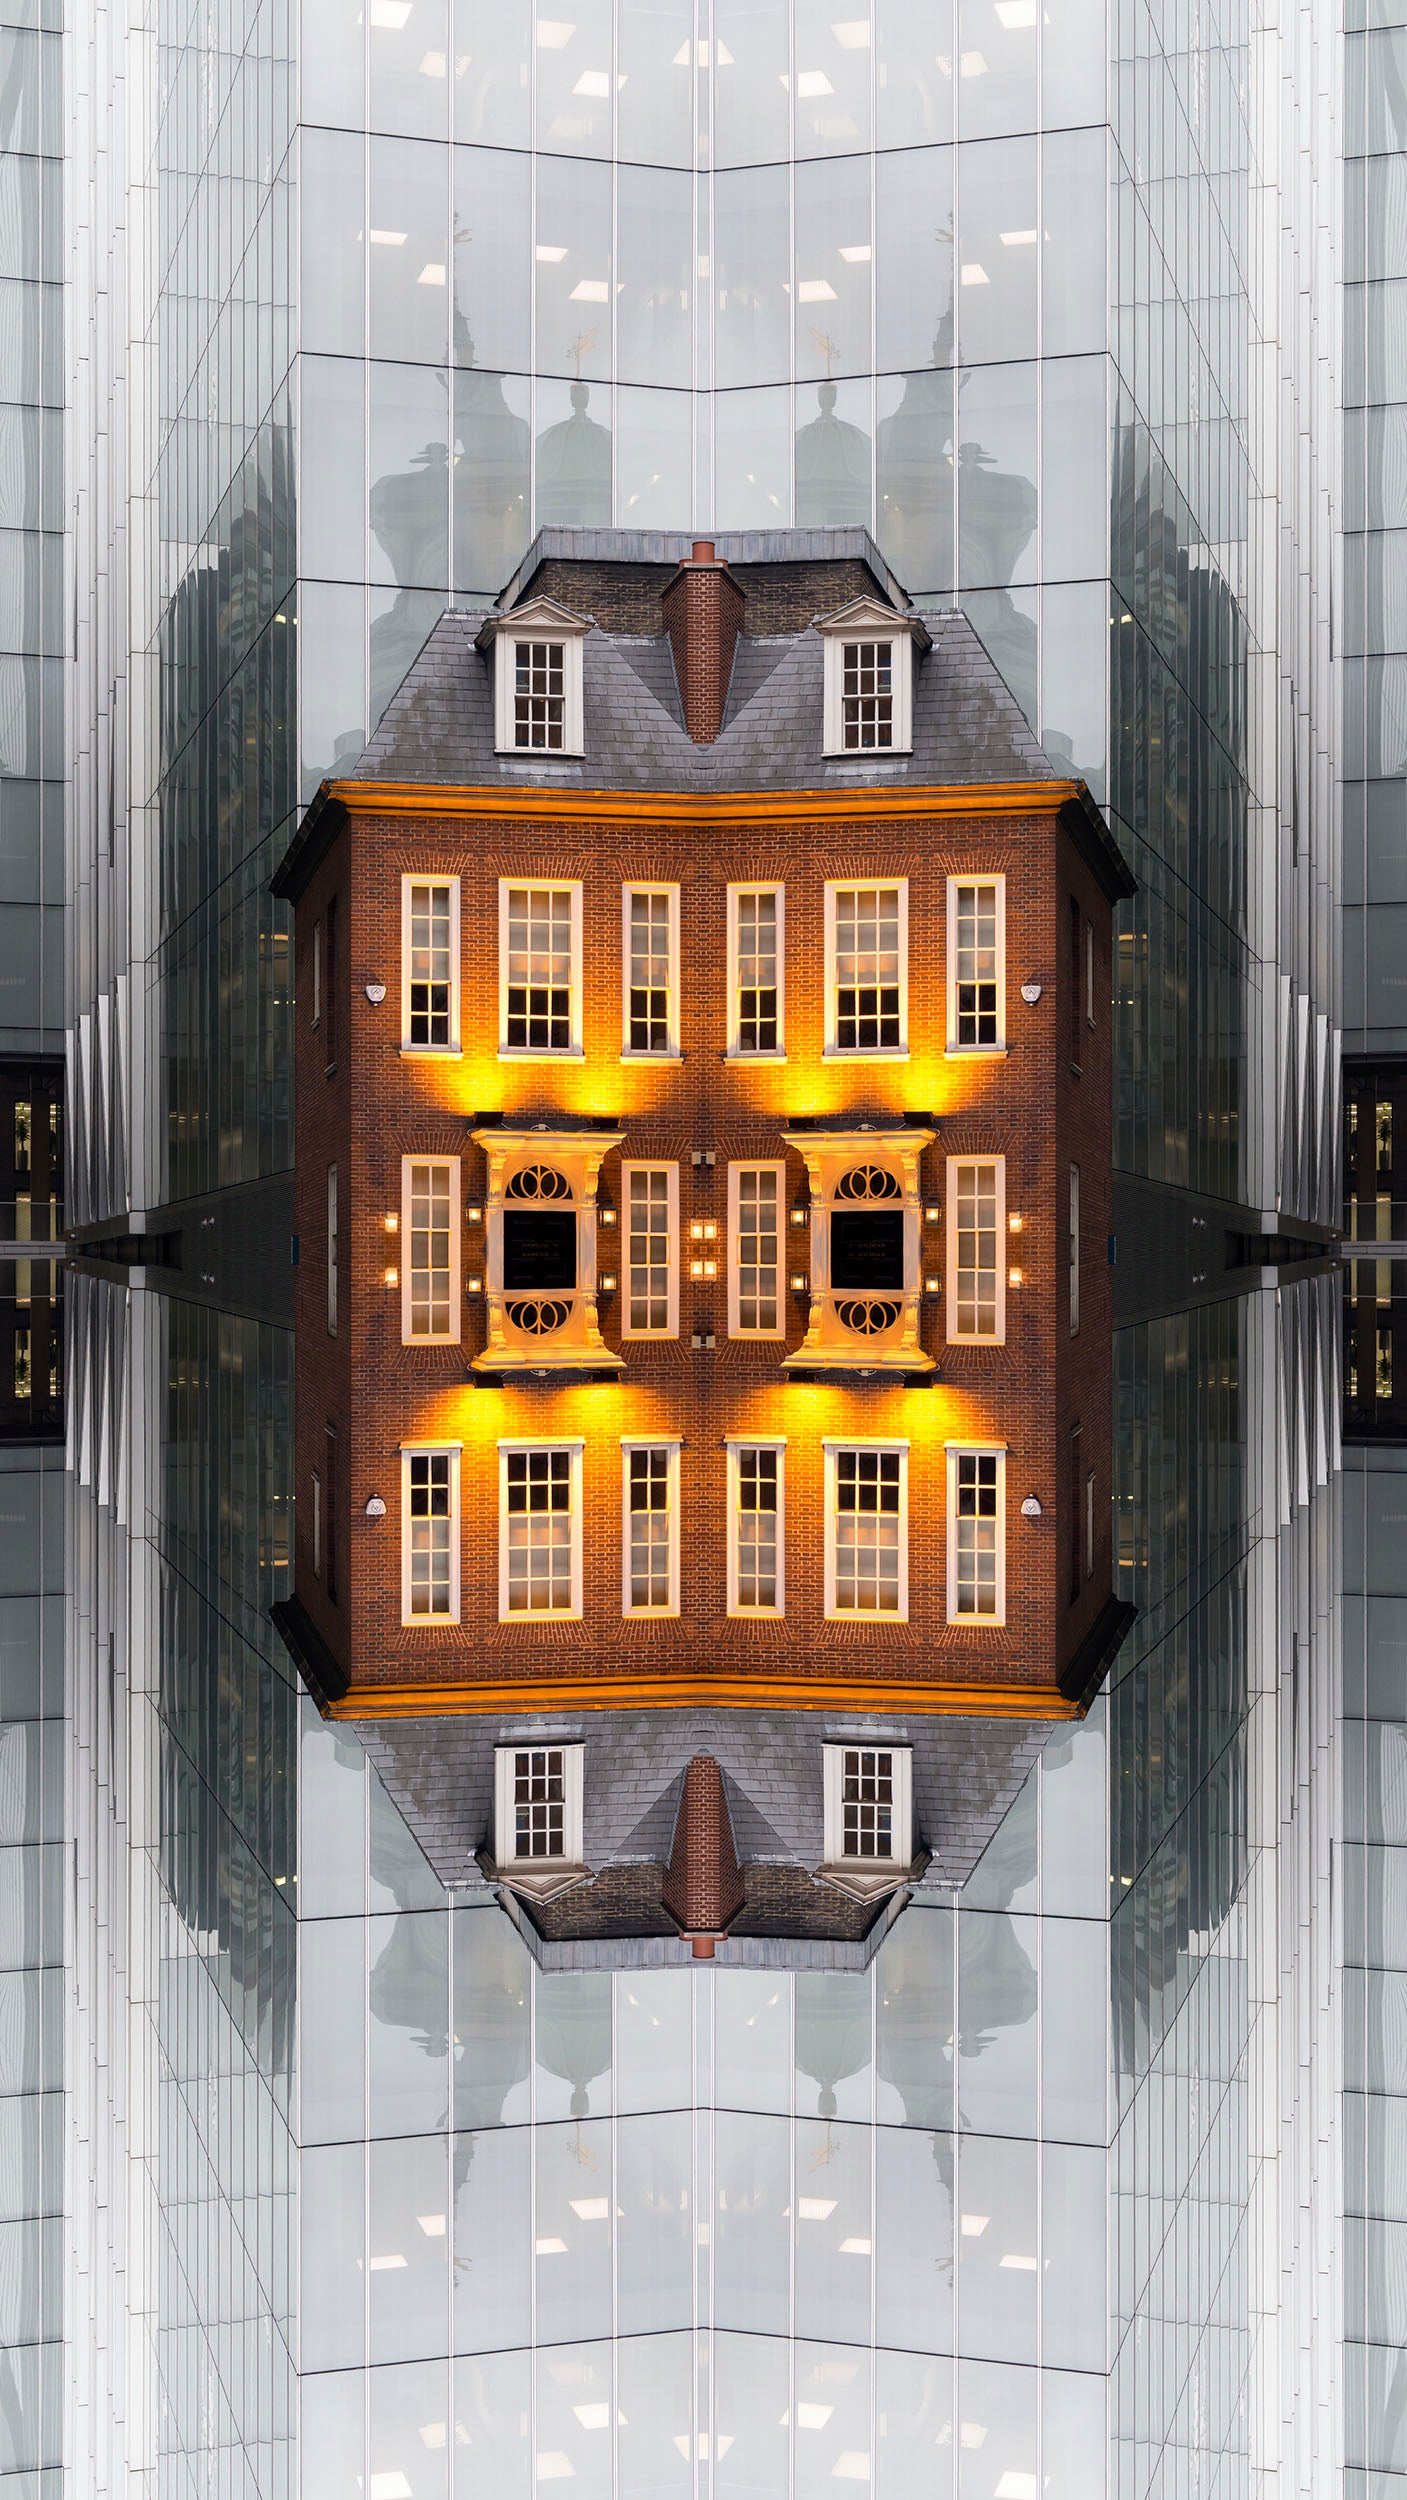 Daniel-Sambraus-Walbrook-Club-Limited-Edition-Digital-Photography-TAP-Galleries, Essex gallery 